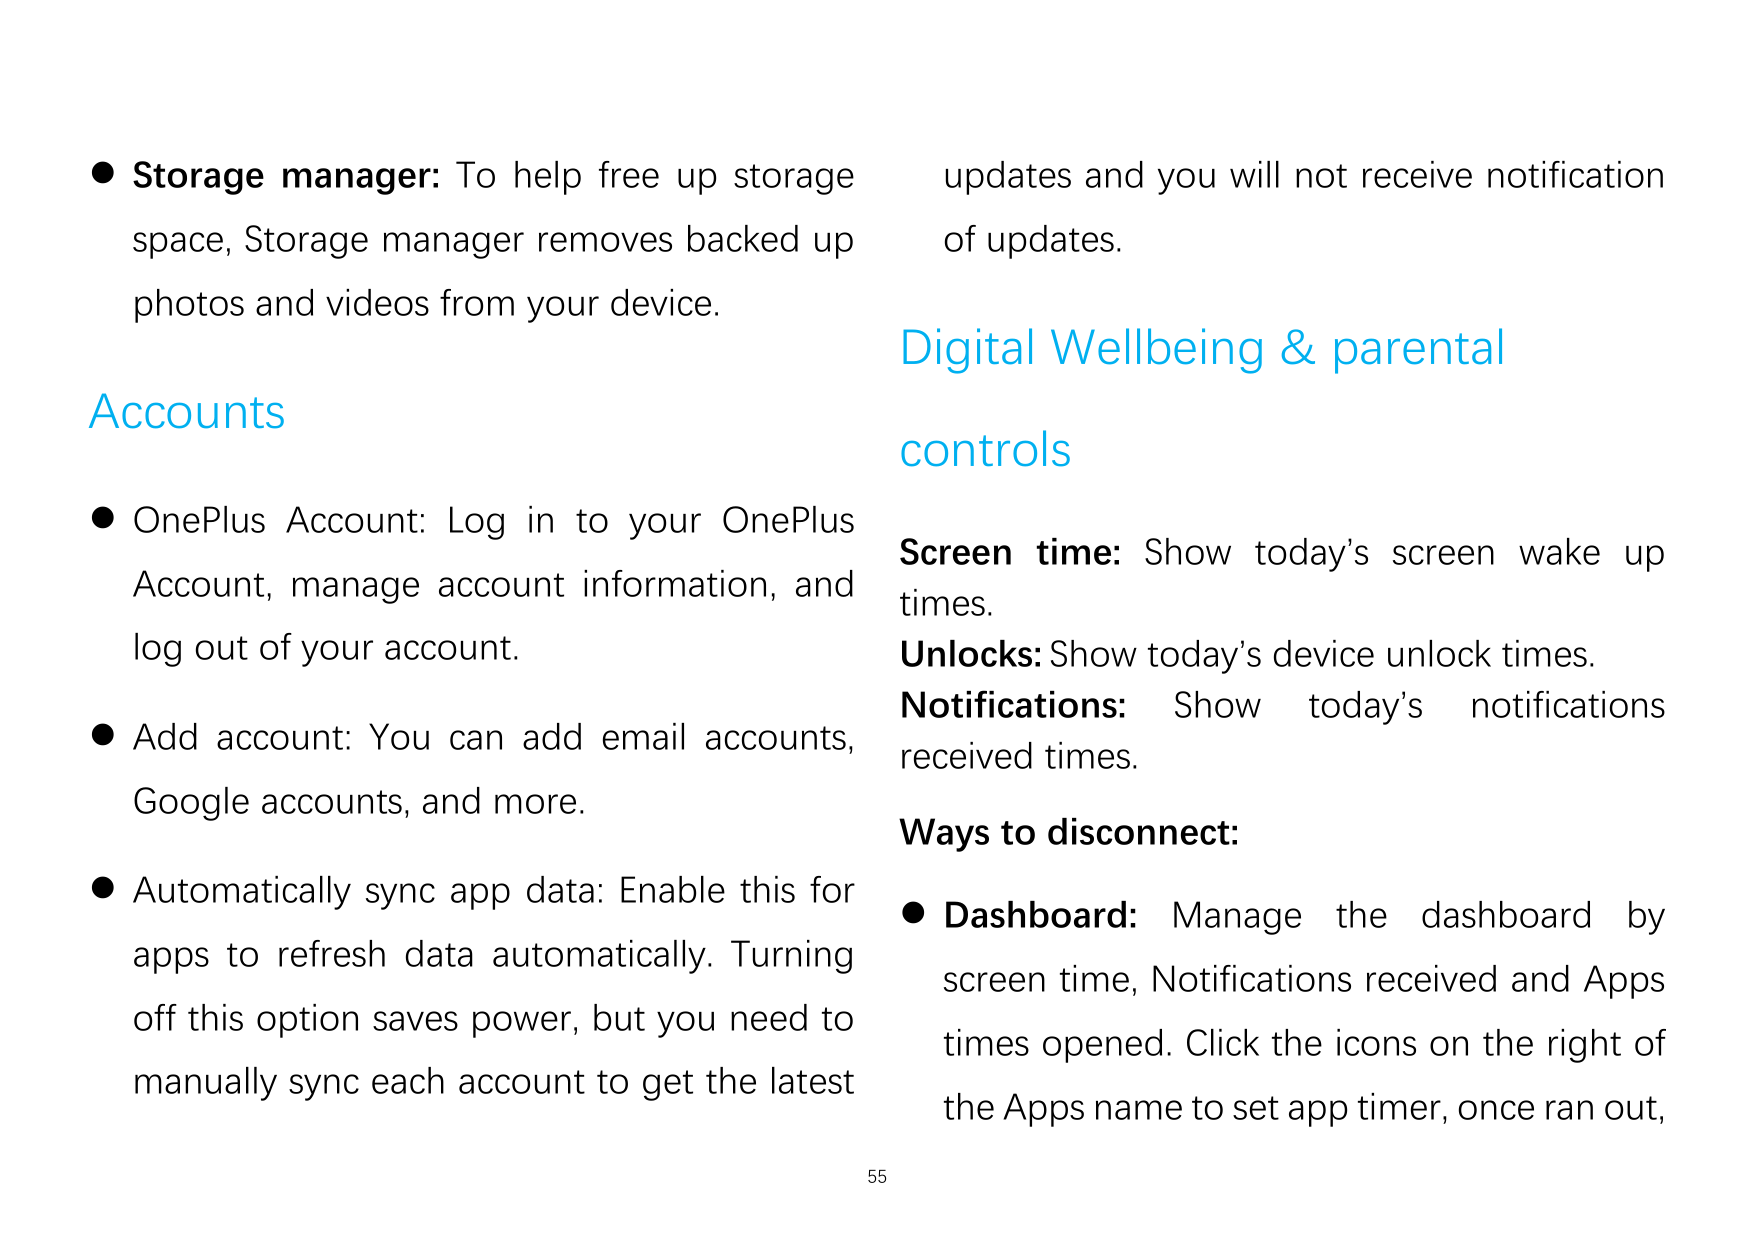  Storage manager: To help free up storageupdates and you will not receive notificationspace, Storage manager removes backed upo